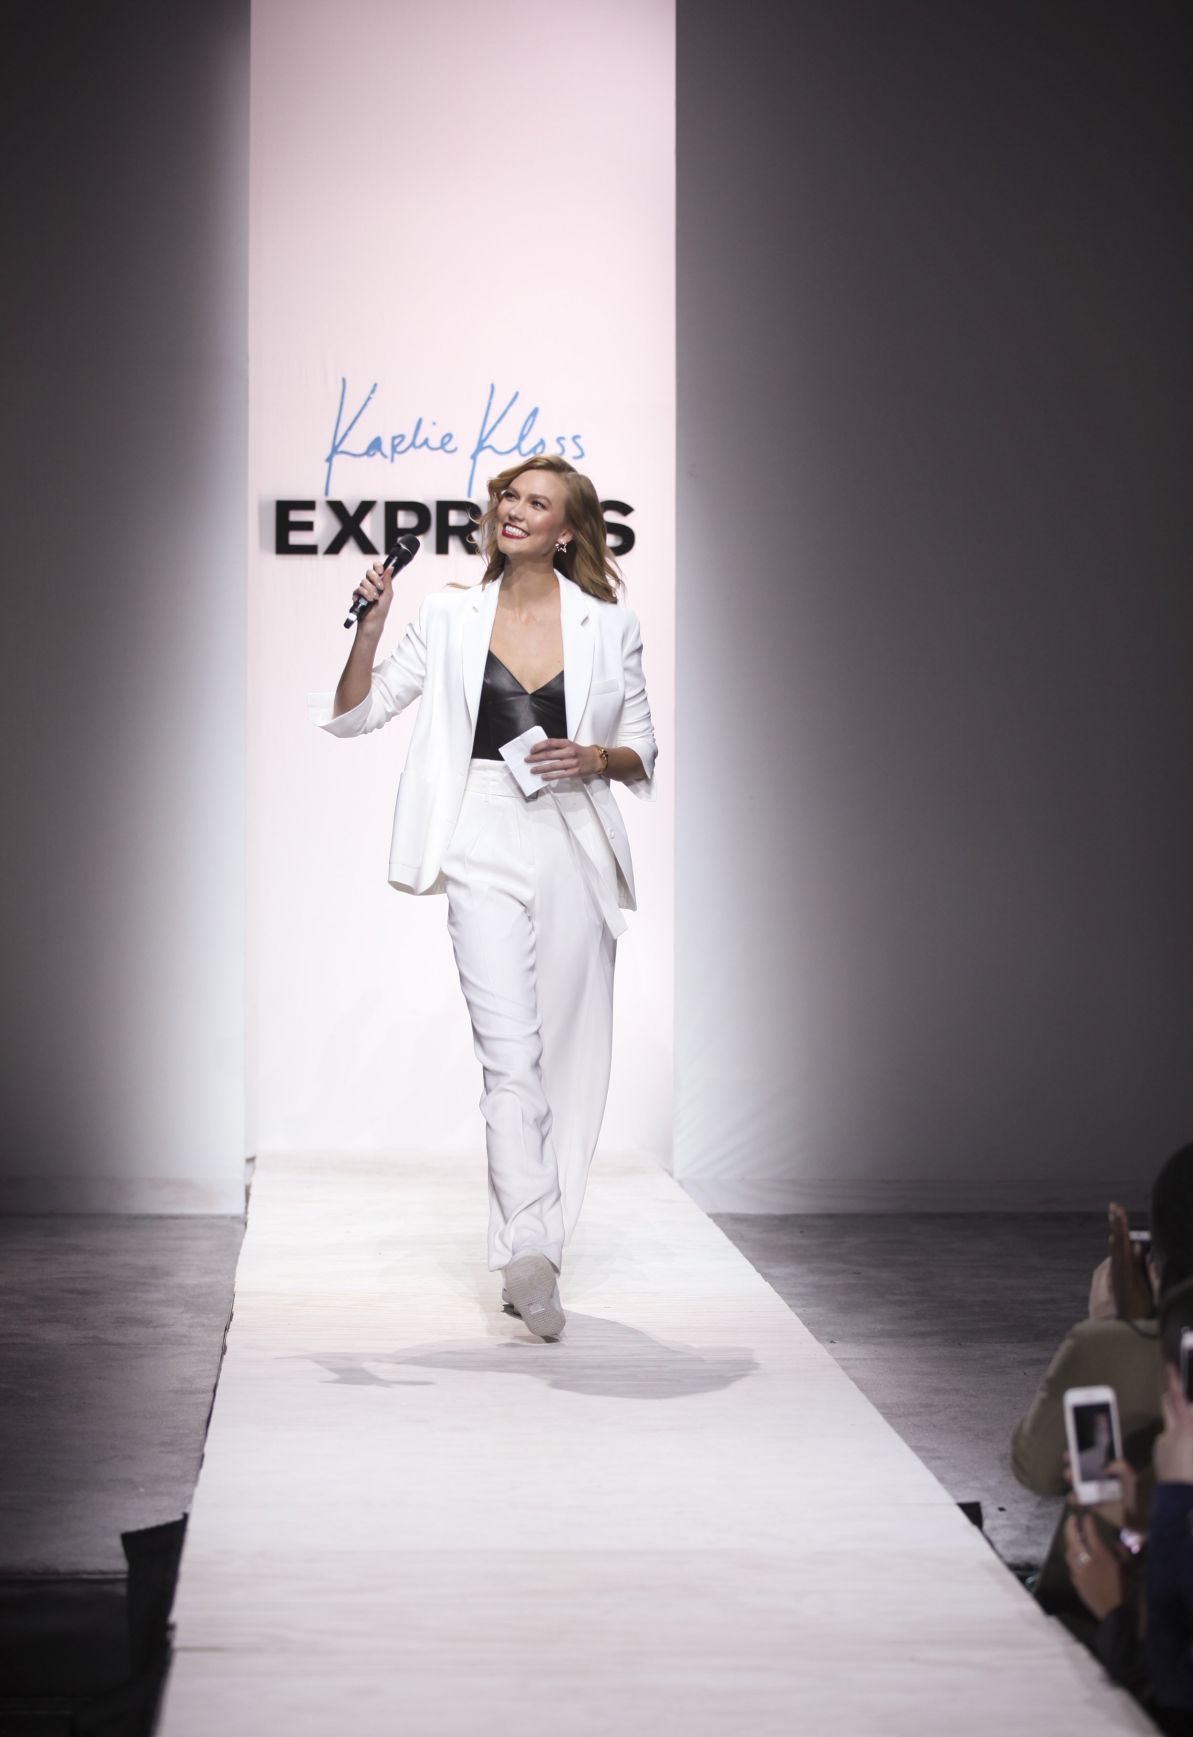 From Webster Groves cheerleader to supermodel, what&#39;s next for Karlie Kloss? | Education ...